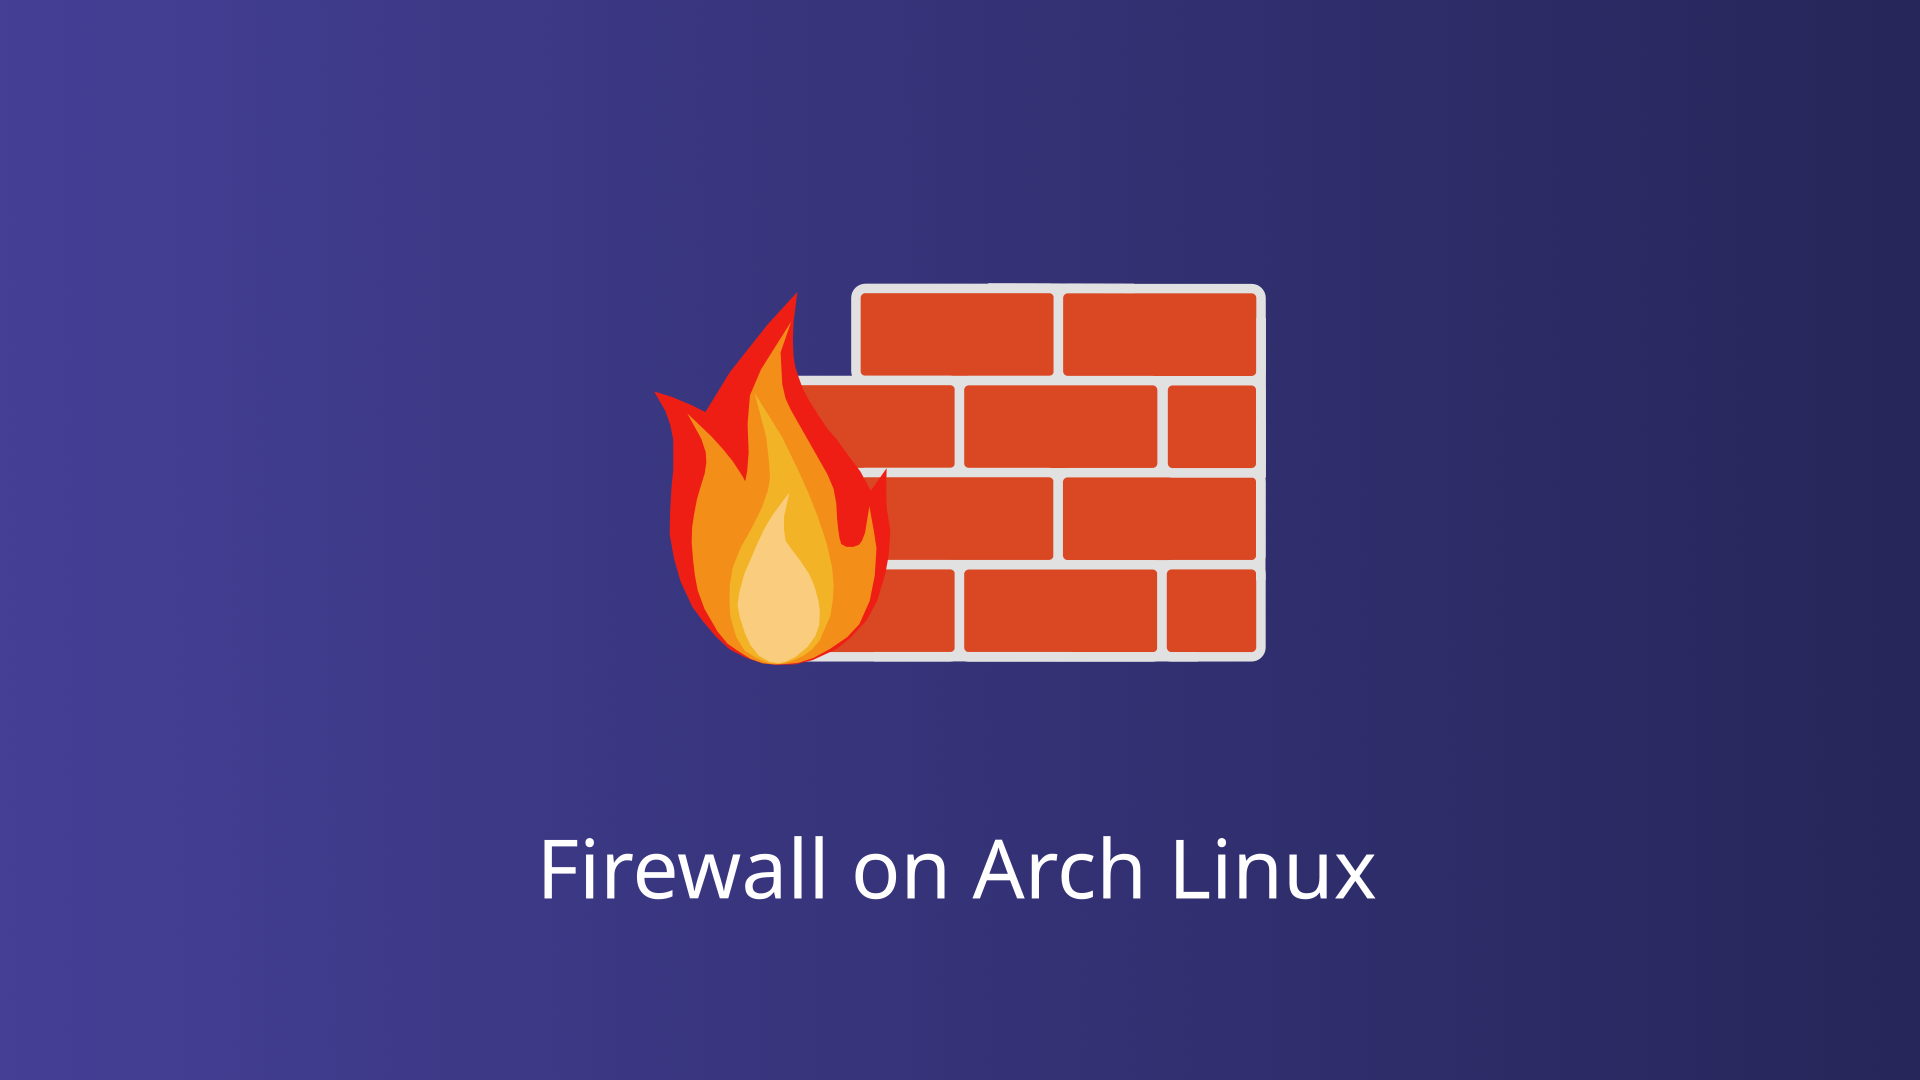 Firewall on Arch Linux